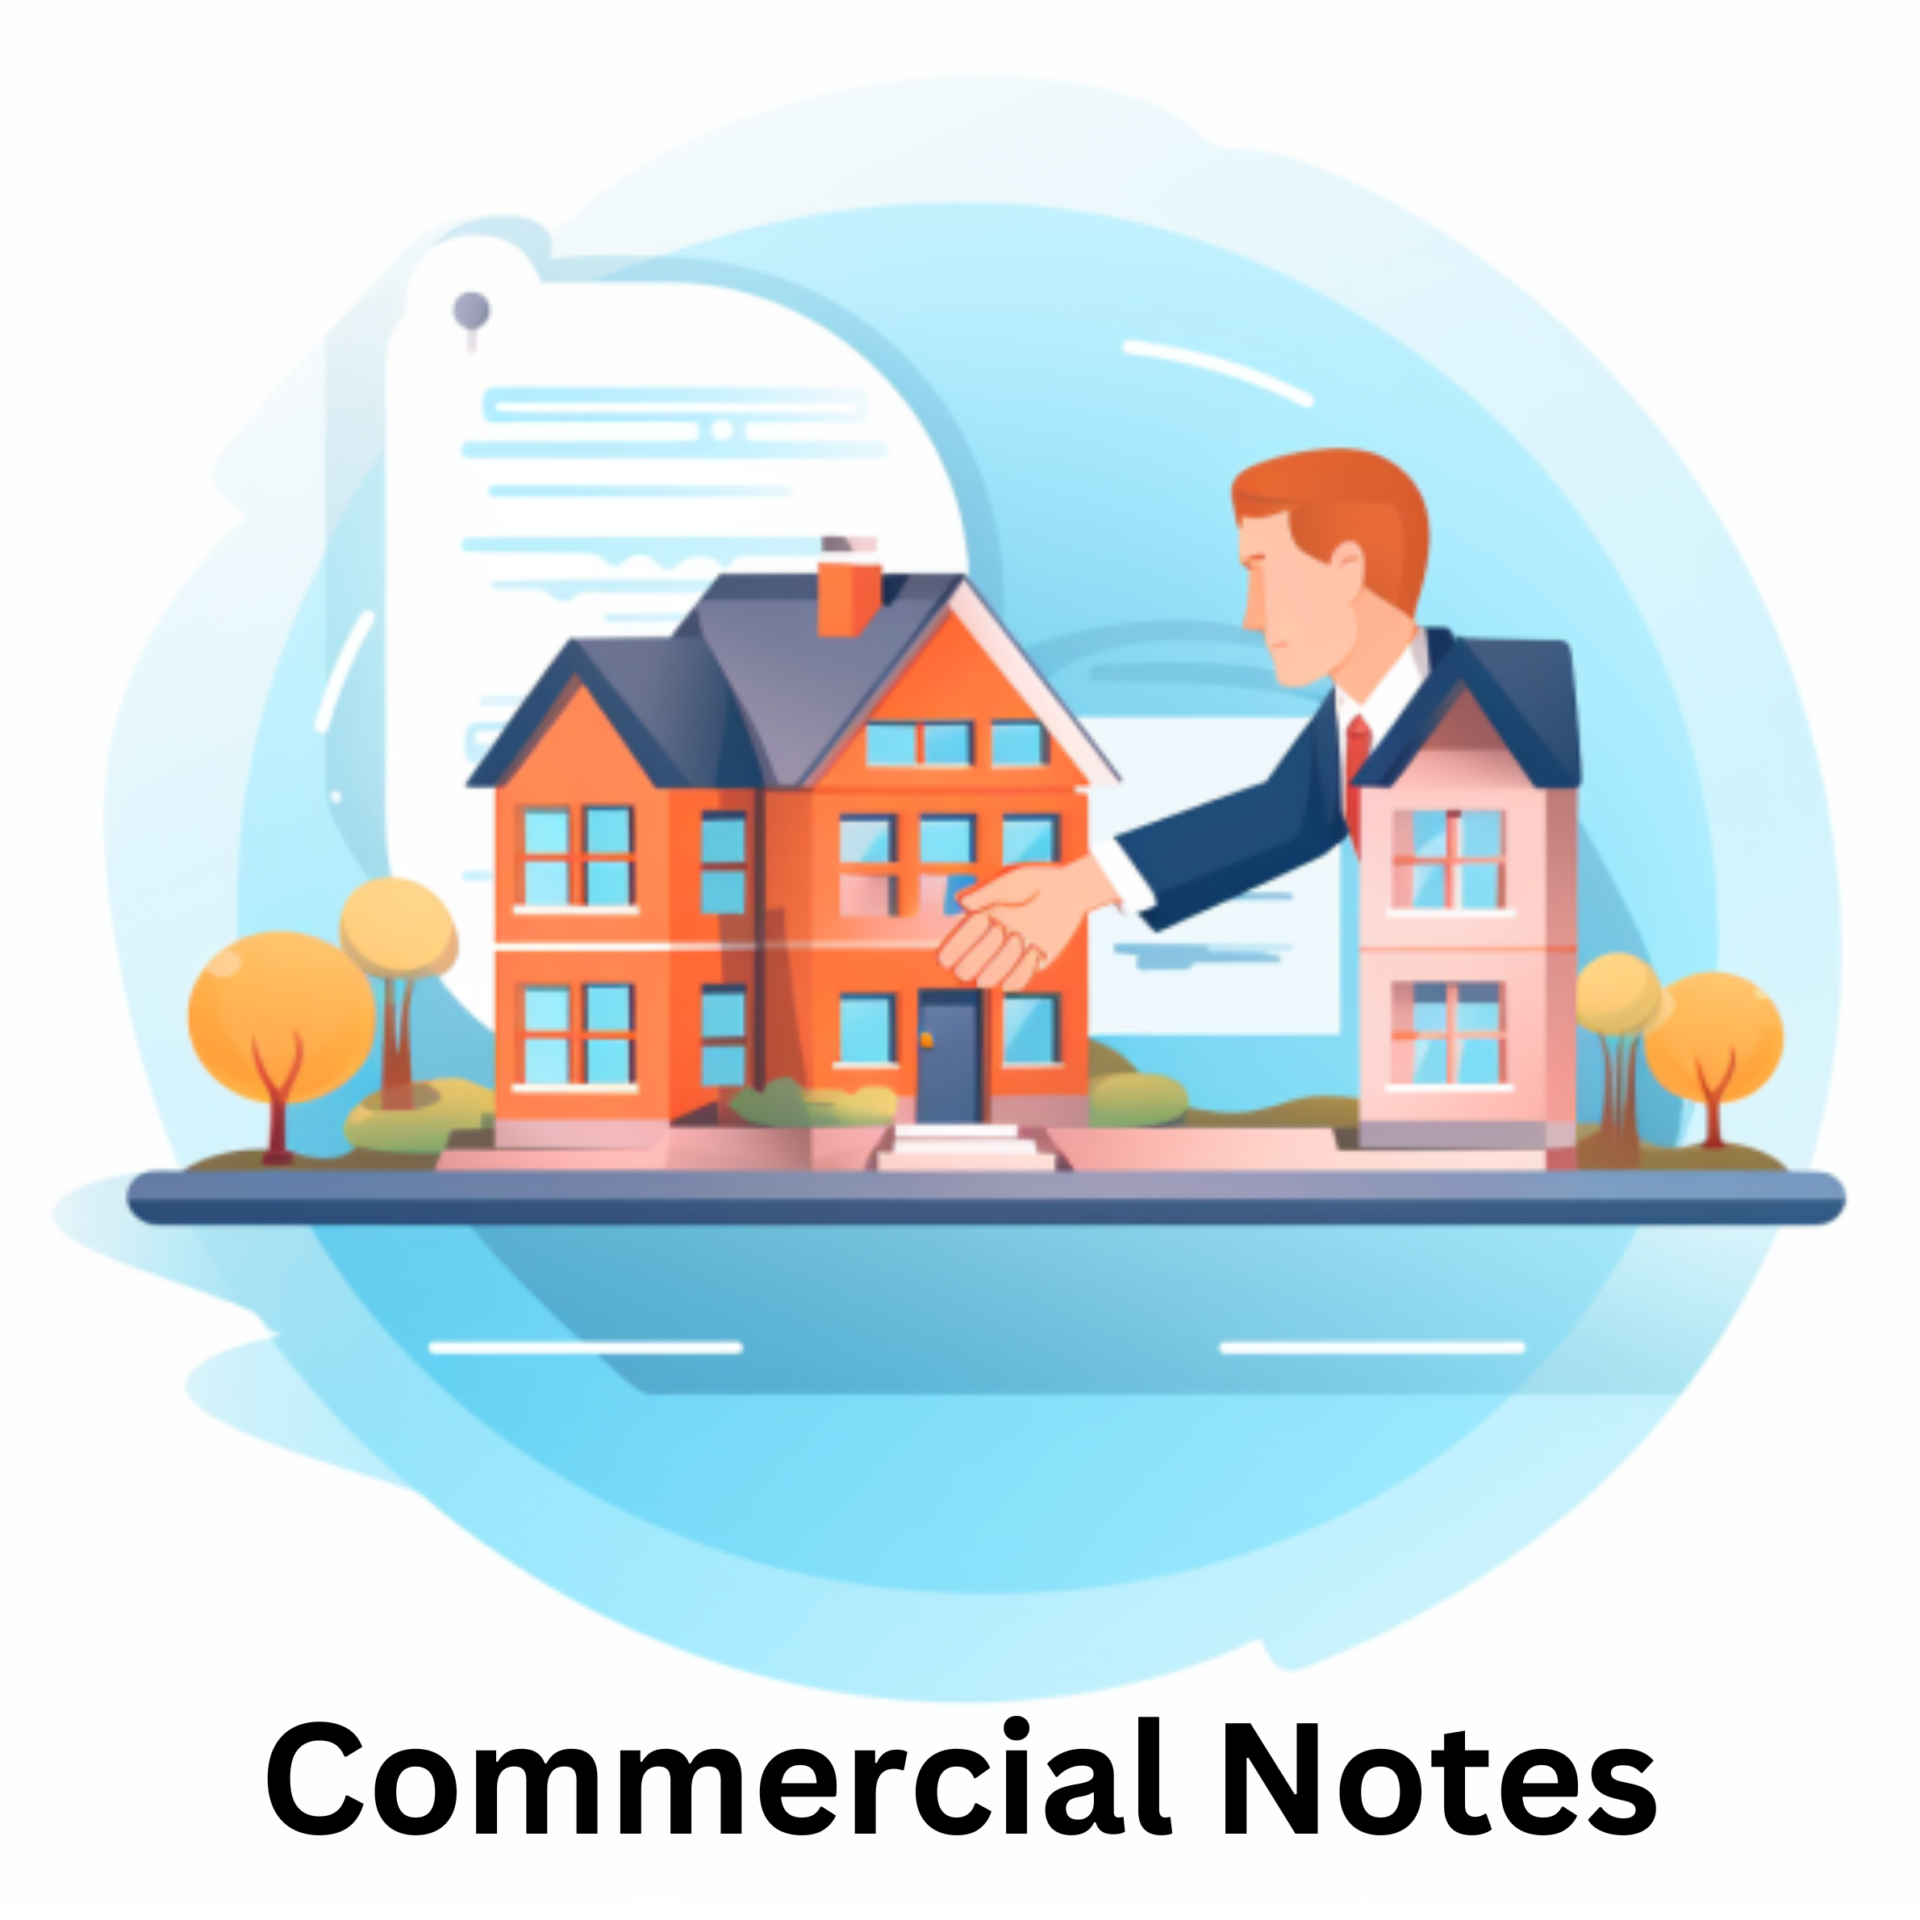 Commercial Notes